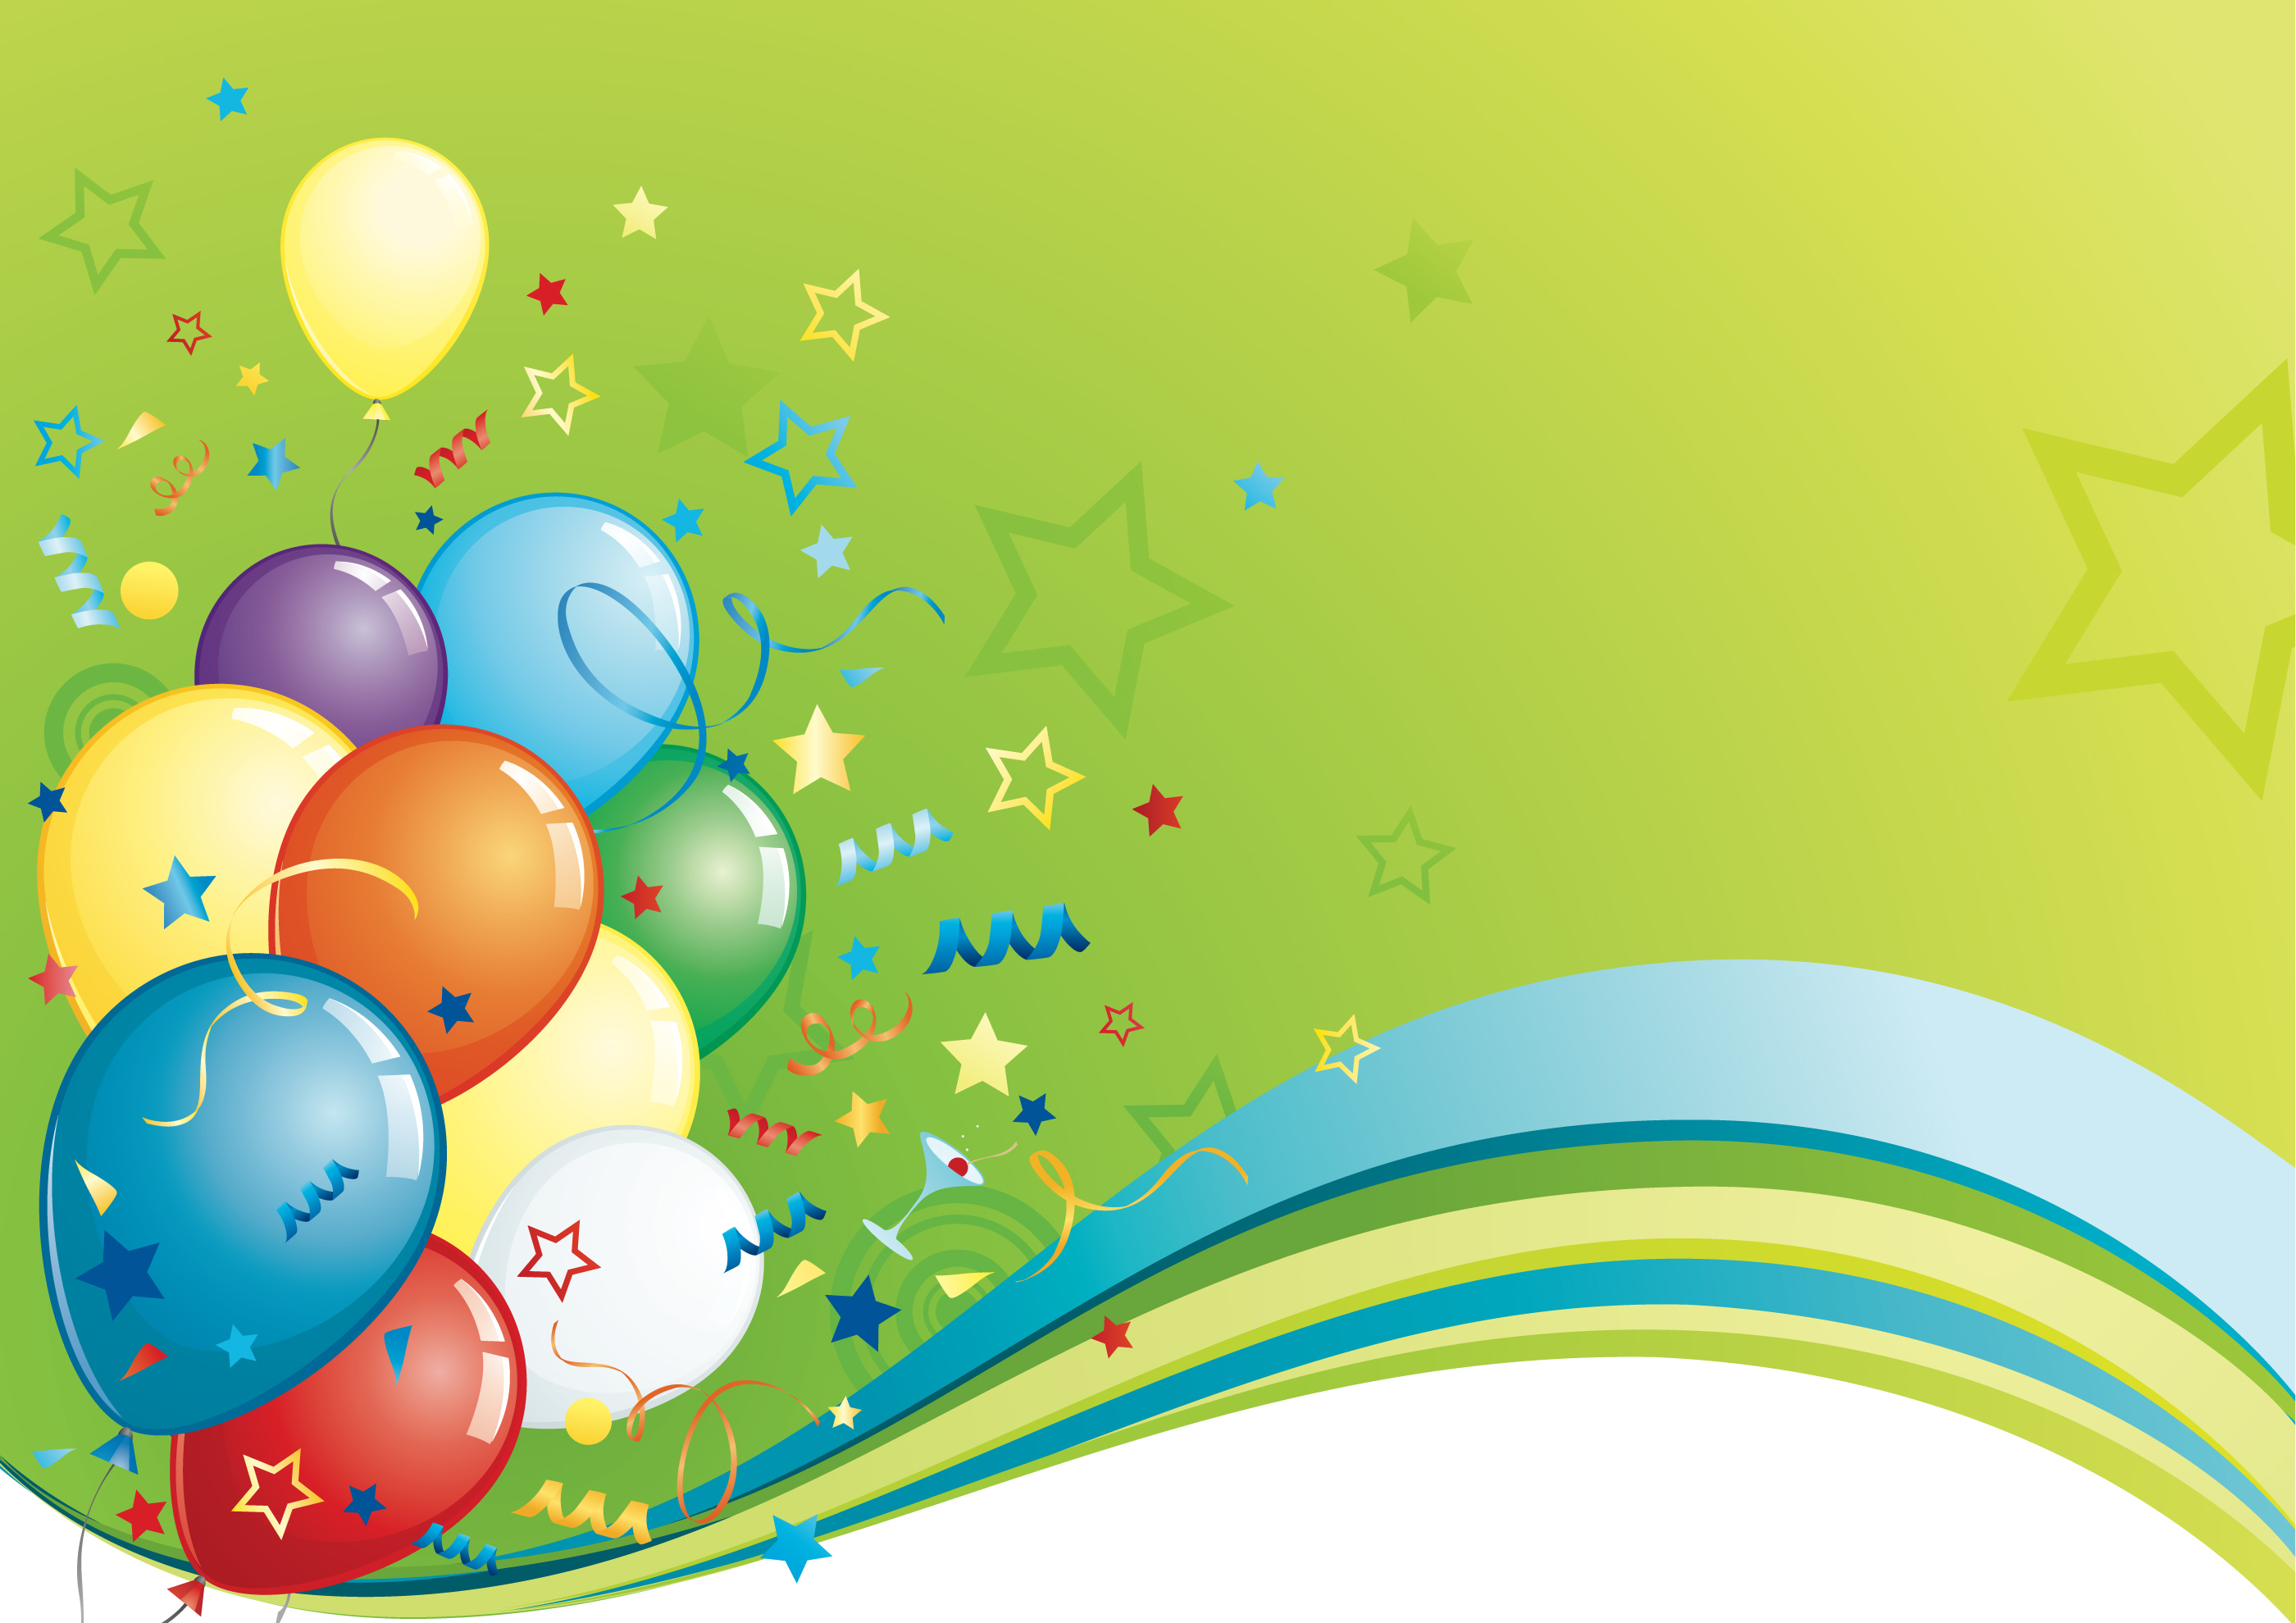 Birthday Party Balloons On Green Background De 14450 Wallpaper